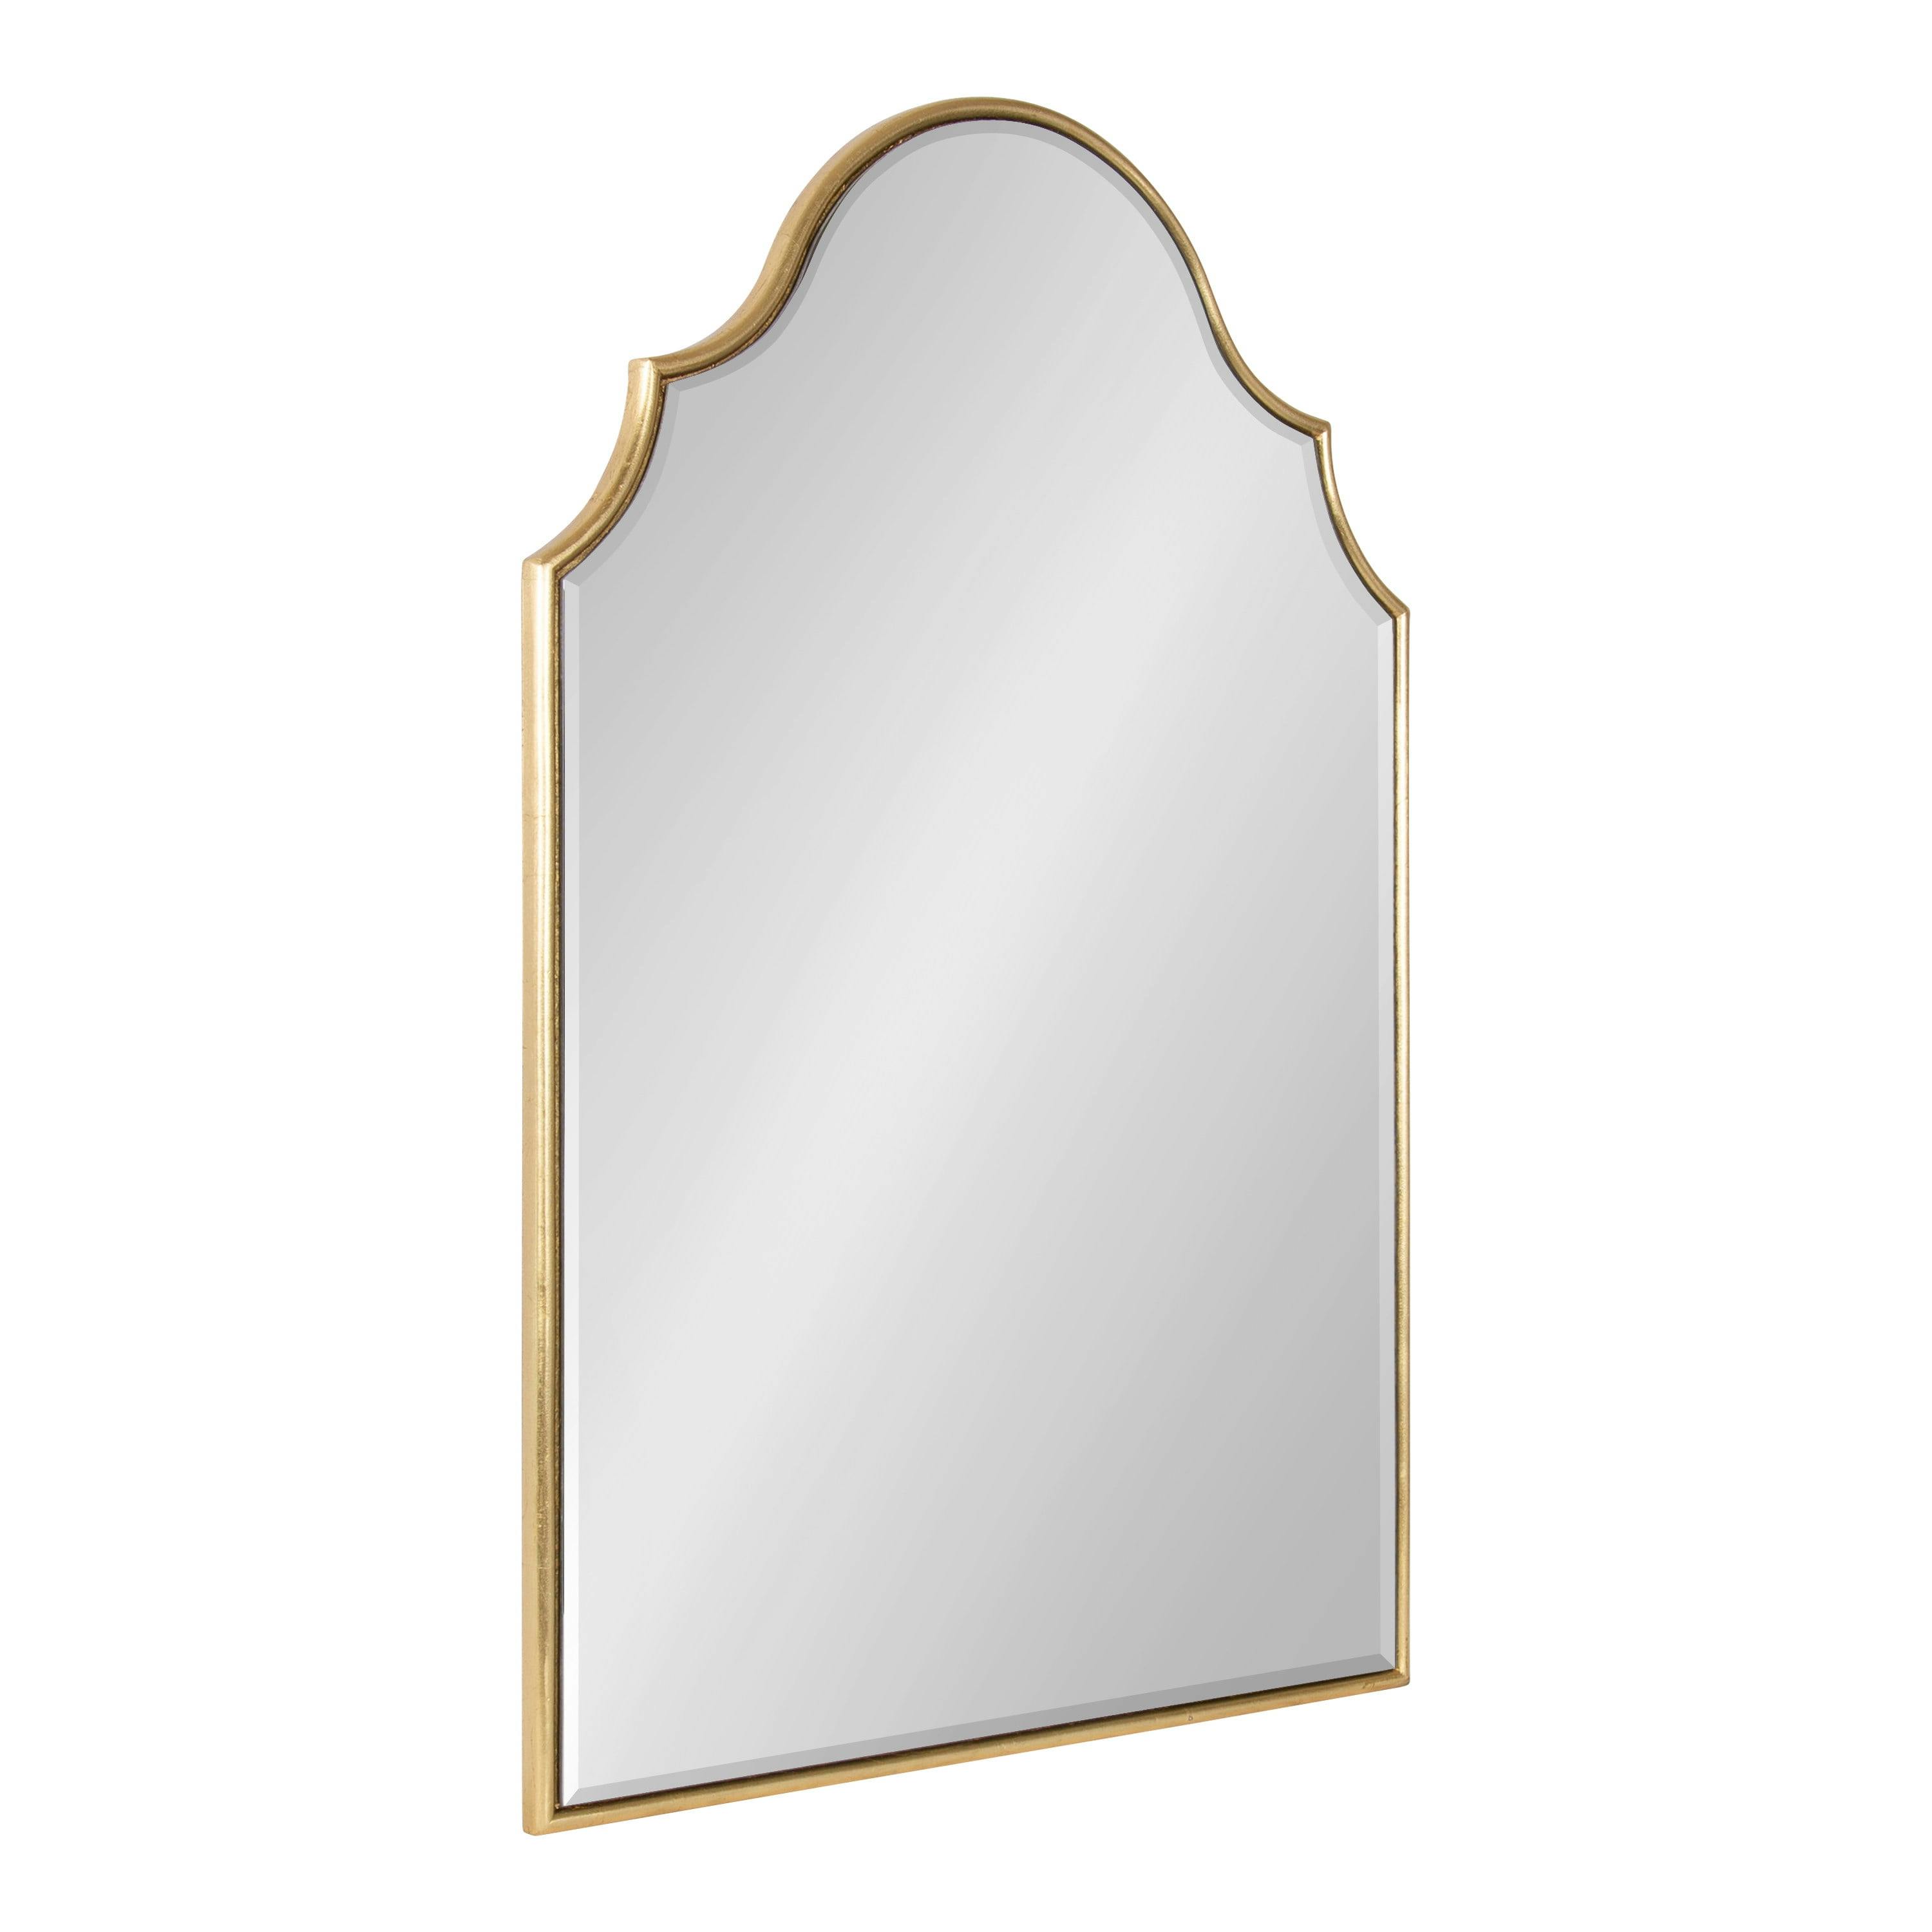 Leanna Gold Leaf Hand-Finished Arched Vanity Mirror 20x30